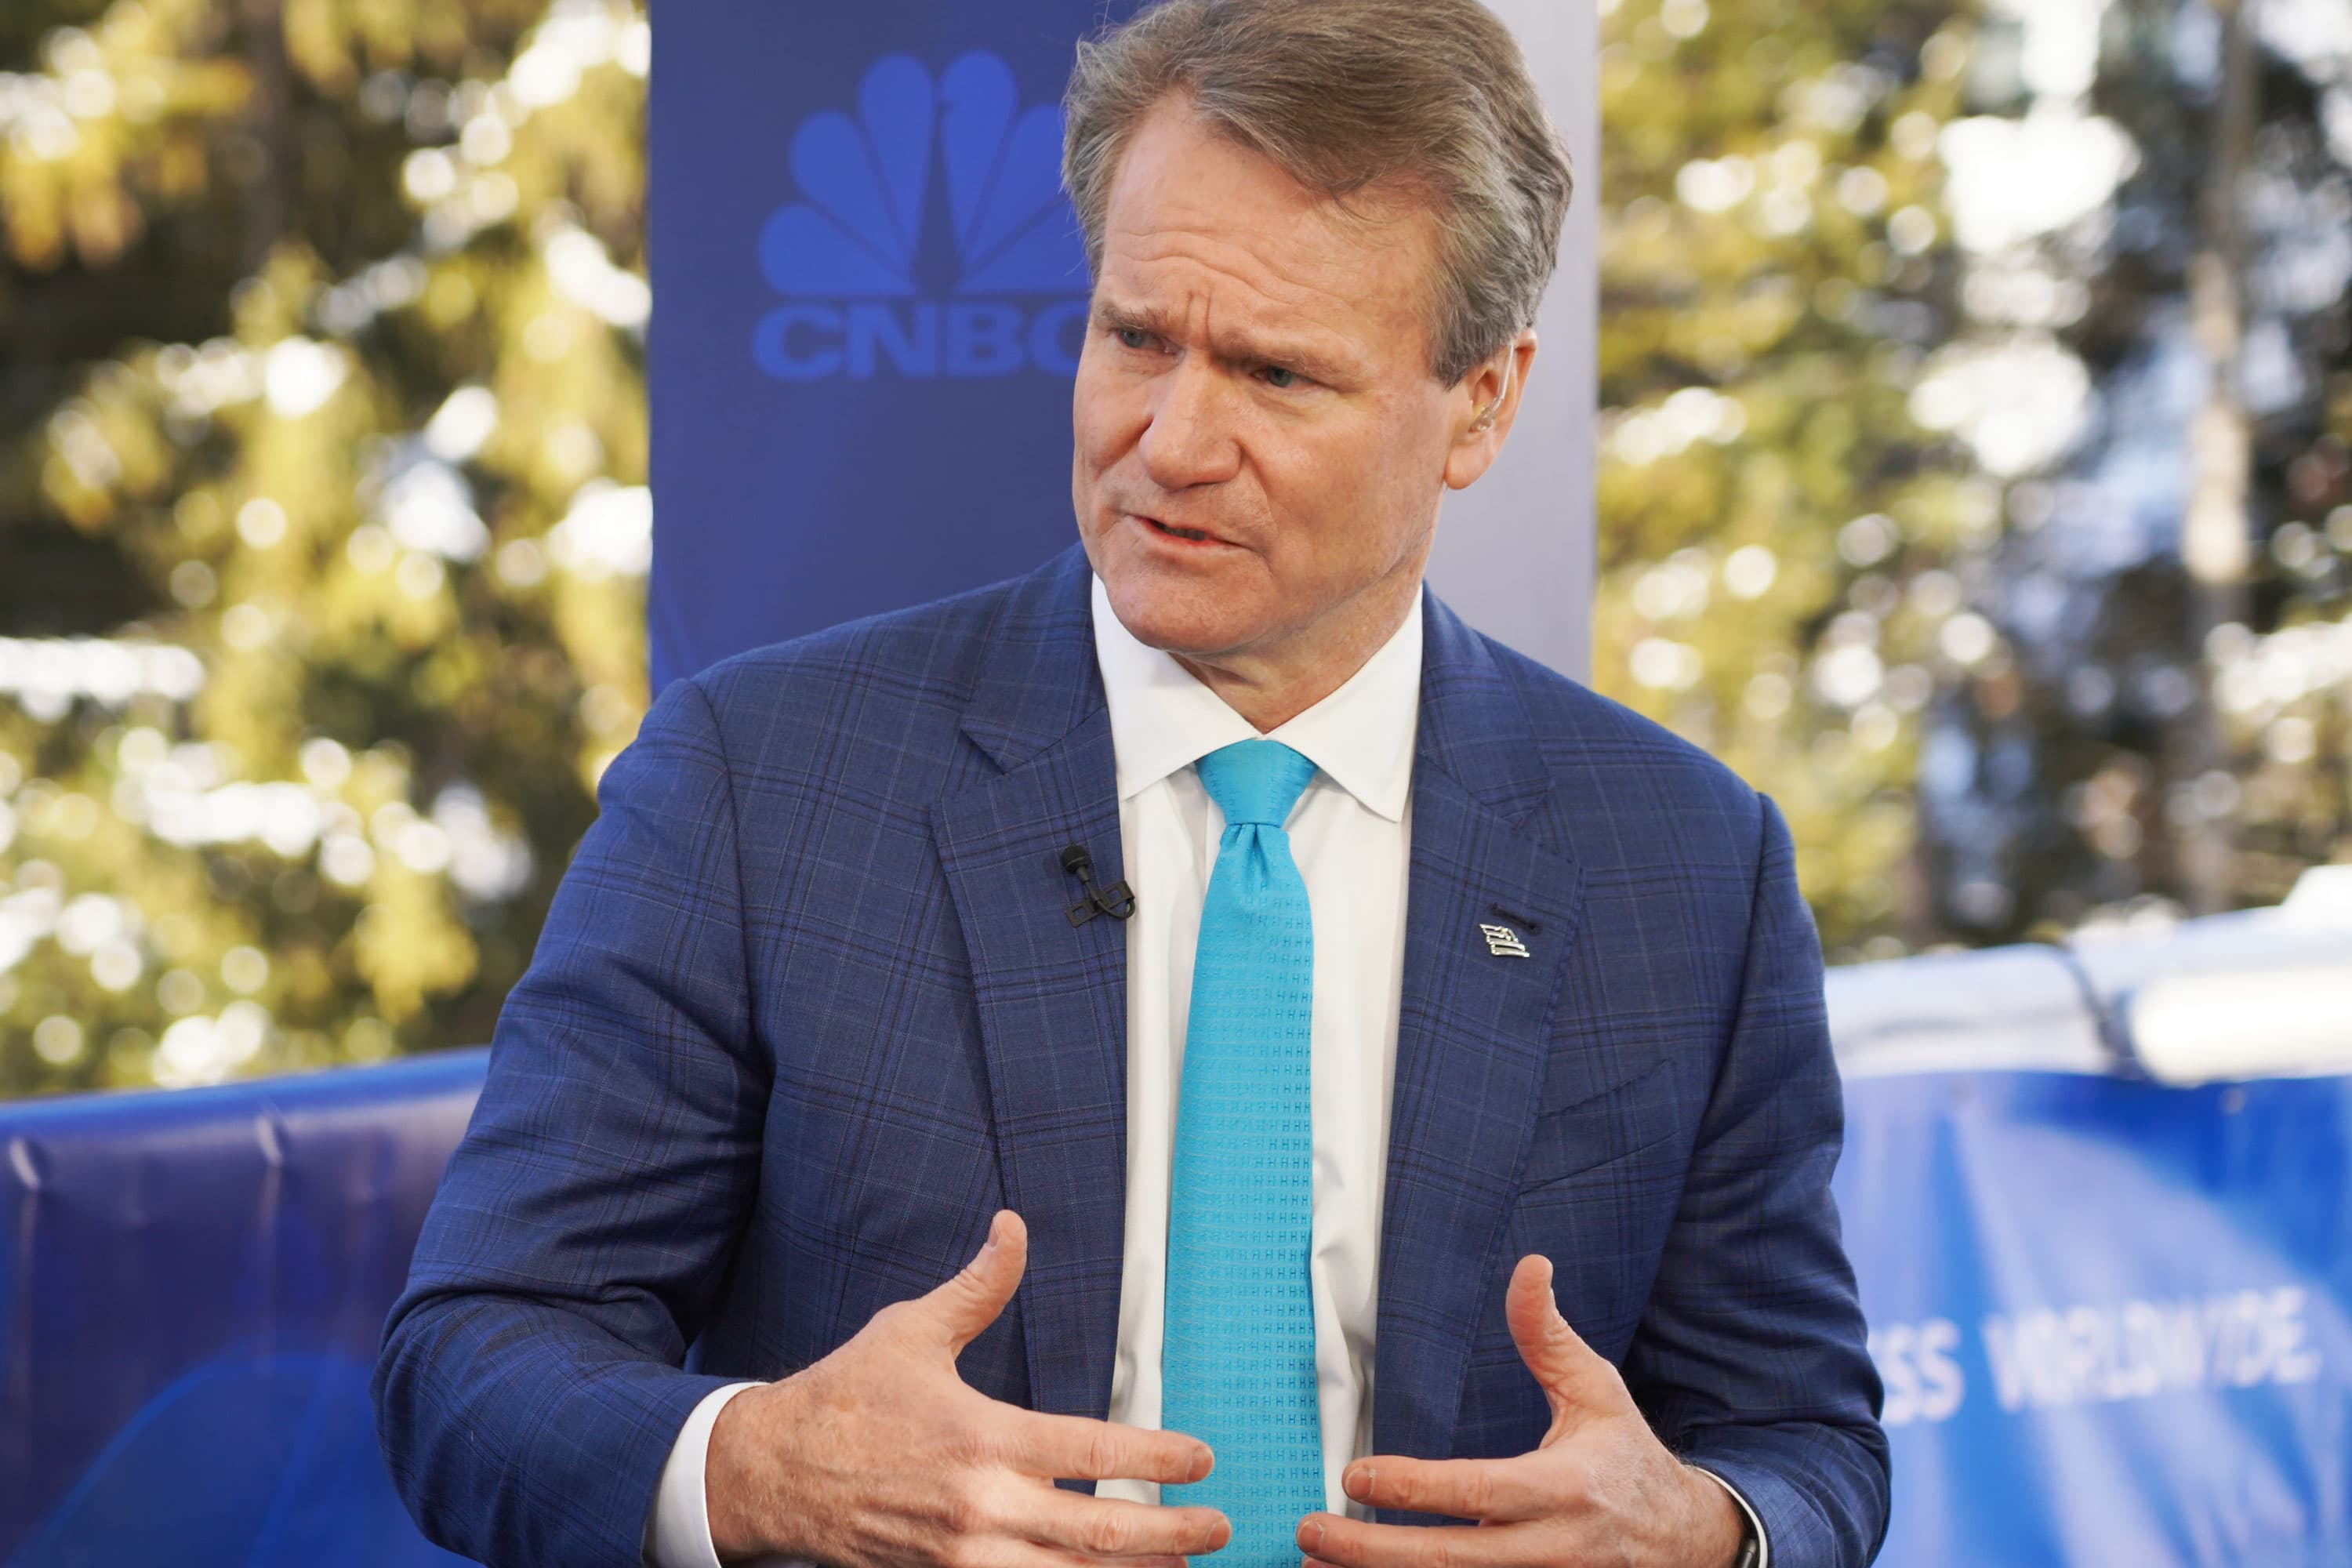 Bank of America’s Moynihan says the Fed can pull back on policy help